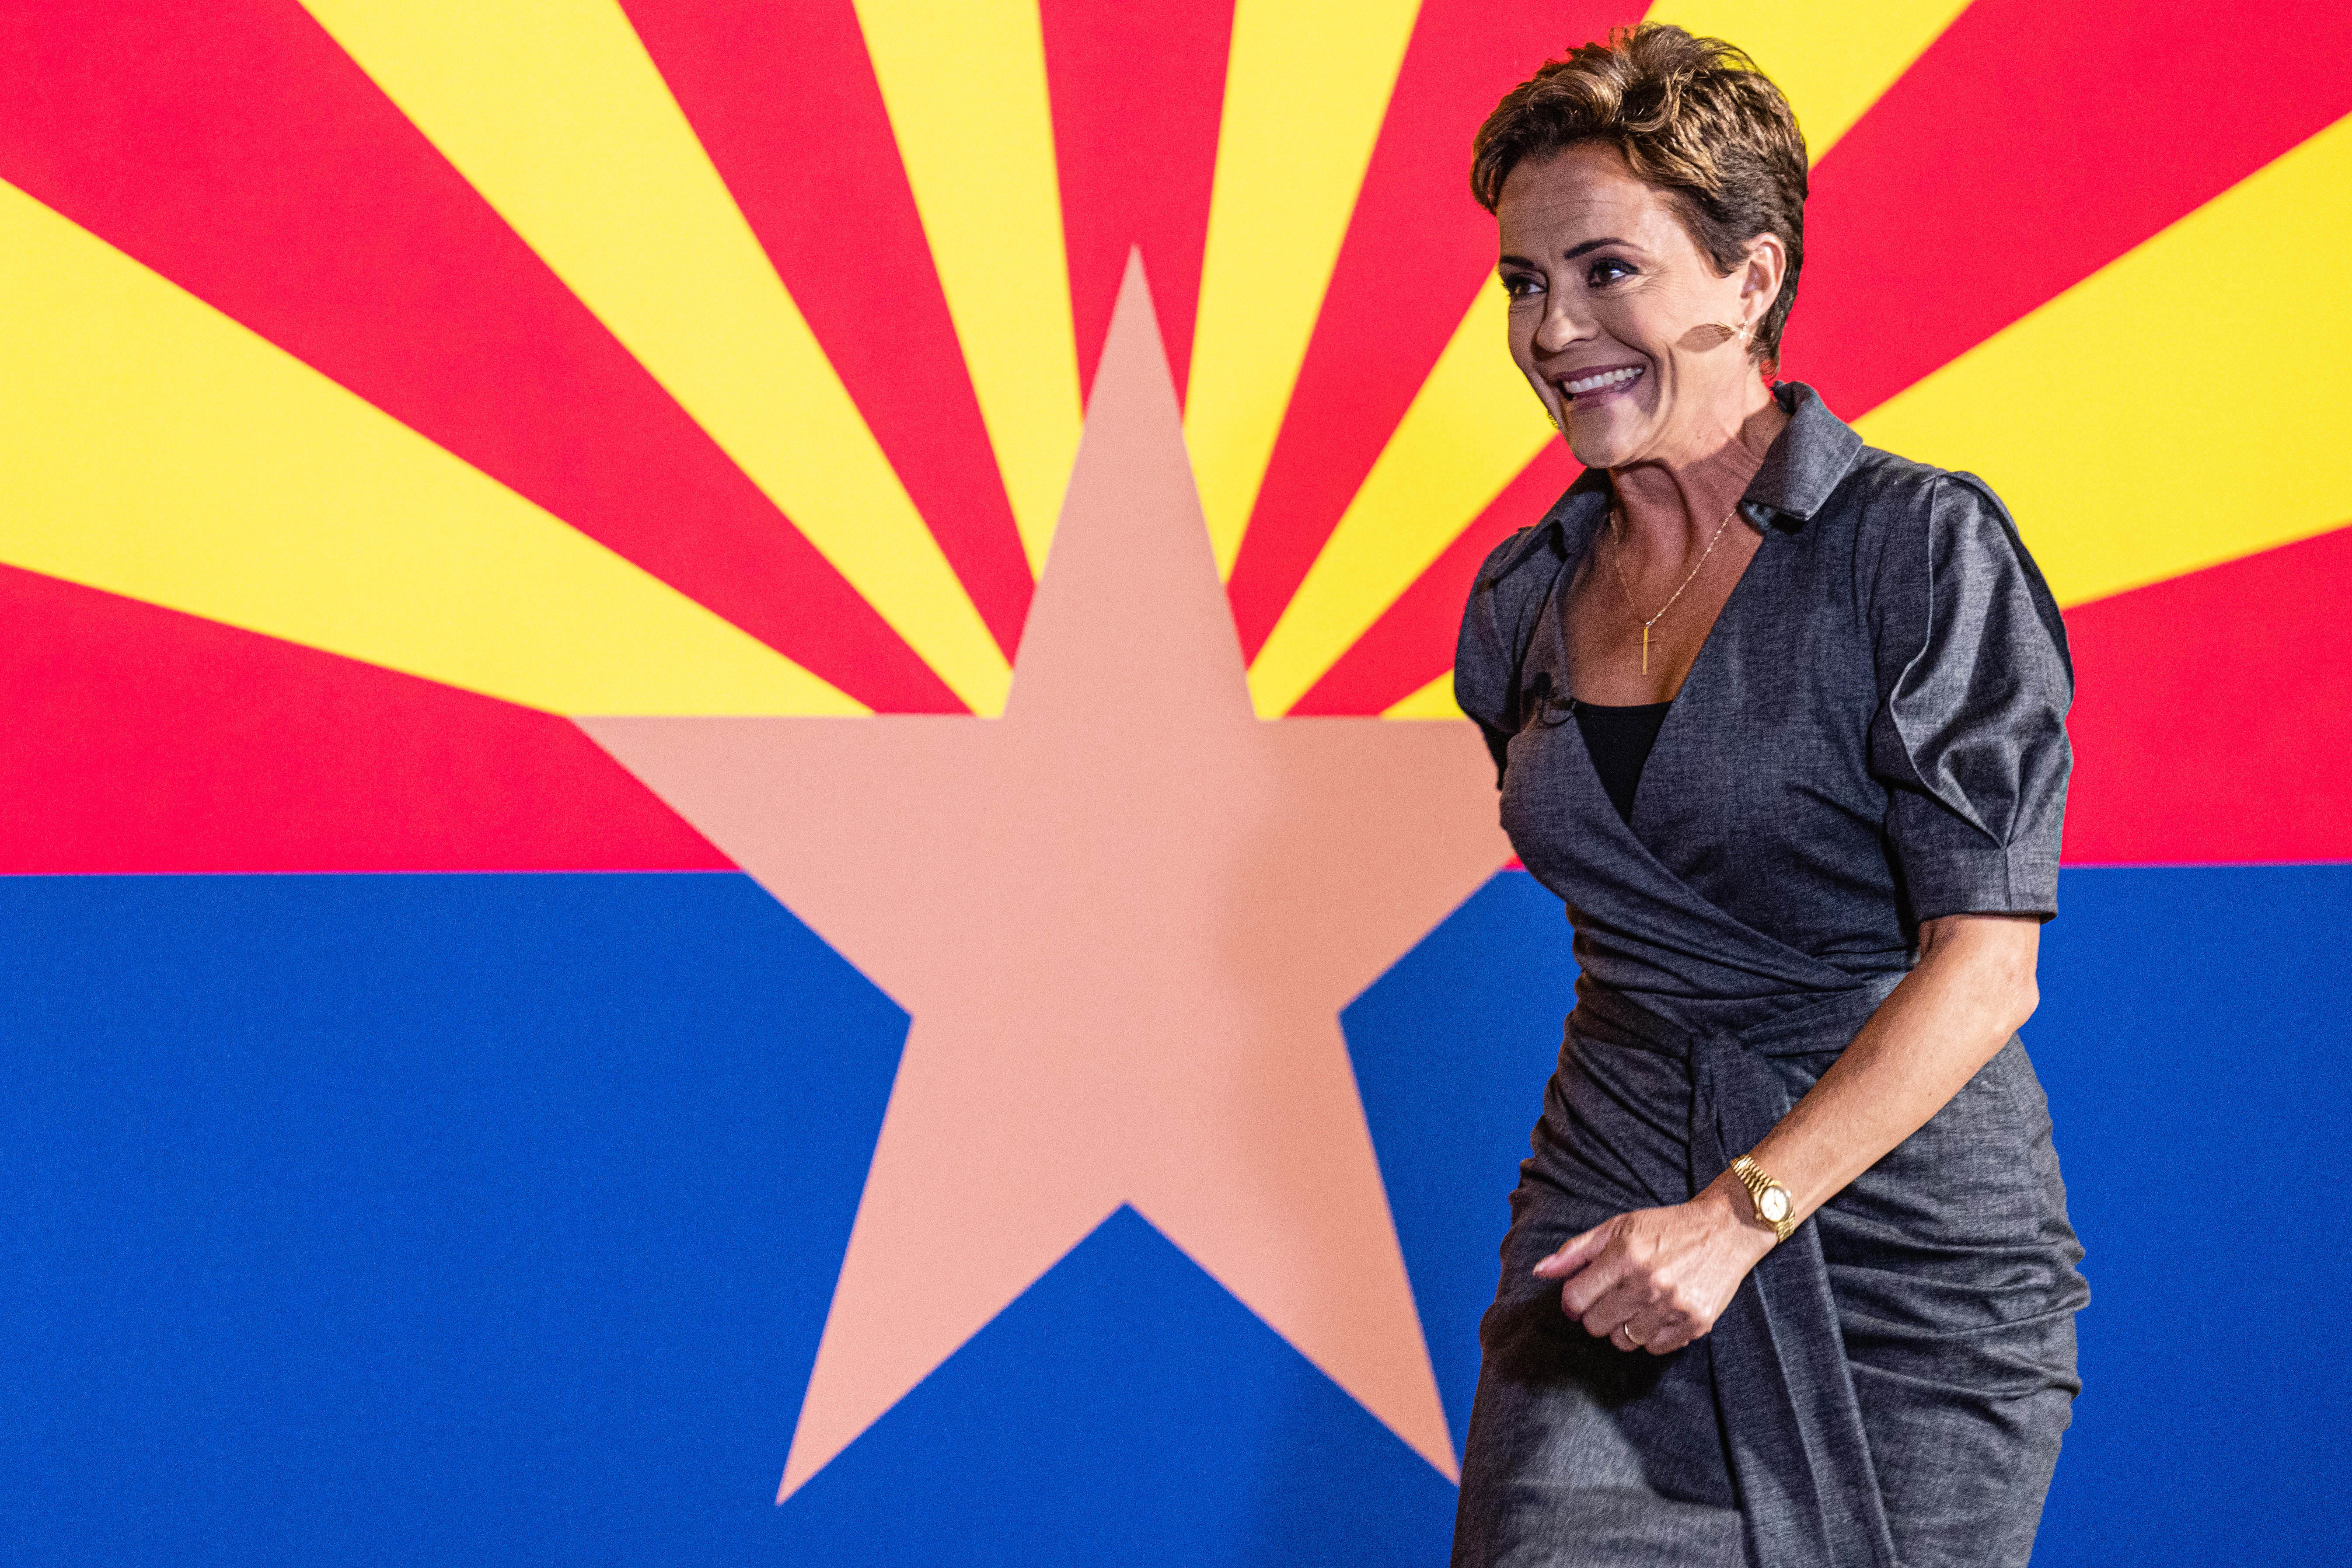 Lake, in a gray wrap dress, her dark blonde hair cut short, smiles as she strides forward purposefully into the spotlight, a giant Arizona state flag hanging behind her.